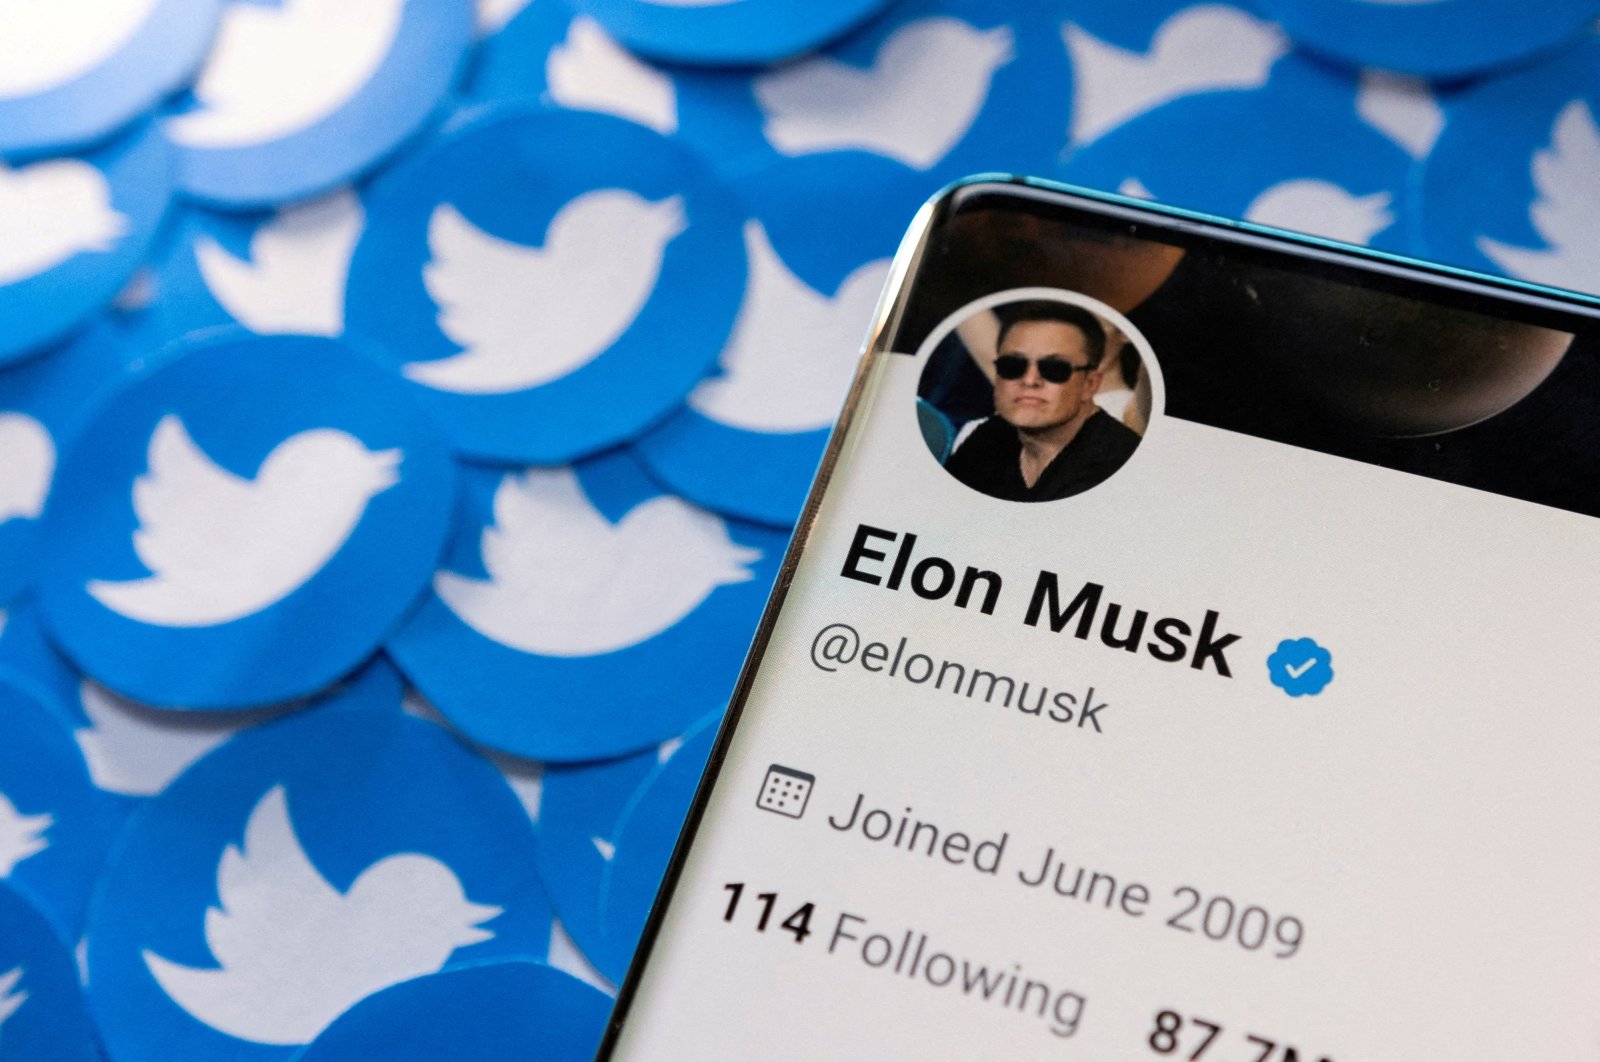 Elon Musk&#039;s Twitter profile is seen on a smartphone placed on printed Twitter logos in this picture illustration taken on April 28, 2022. (Reuters File Photo)